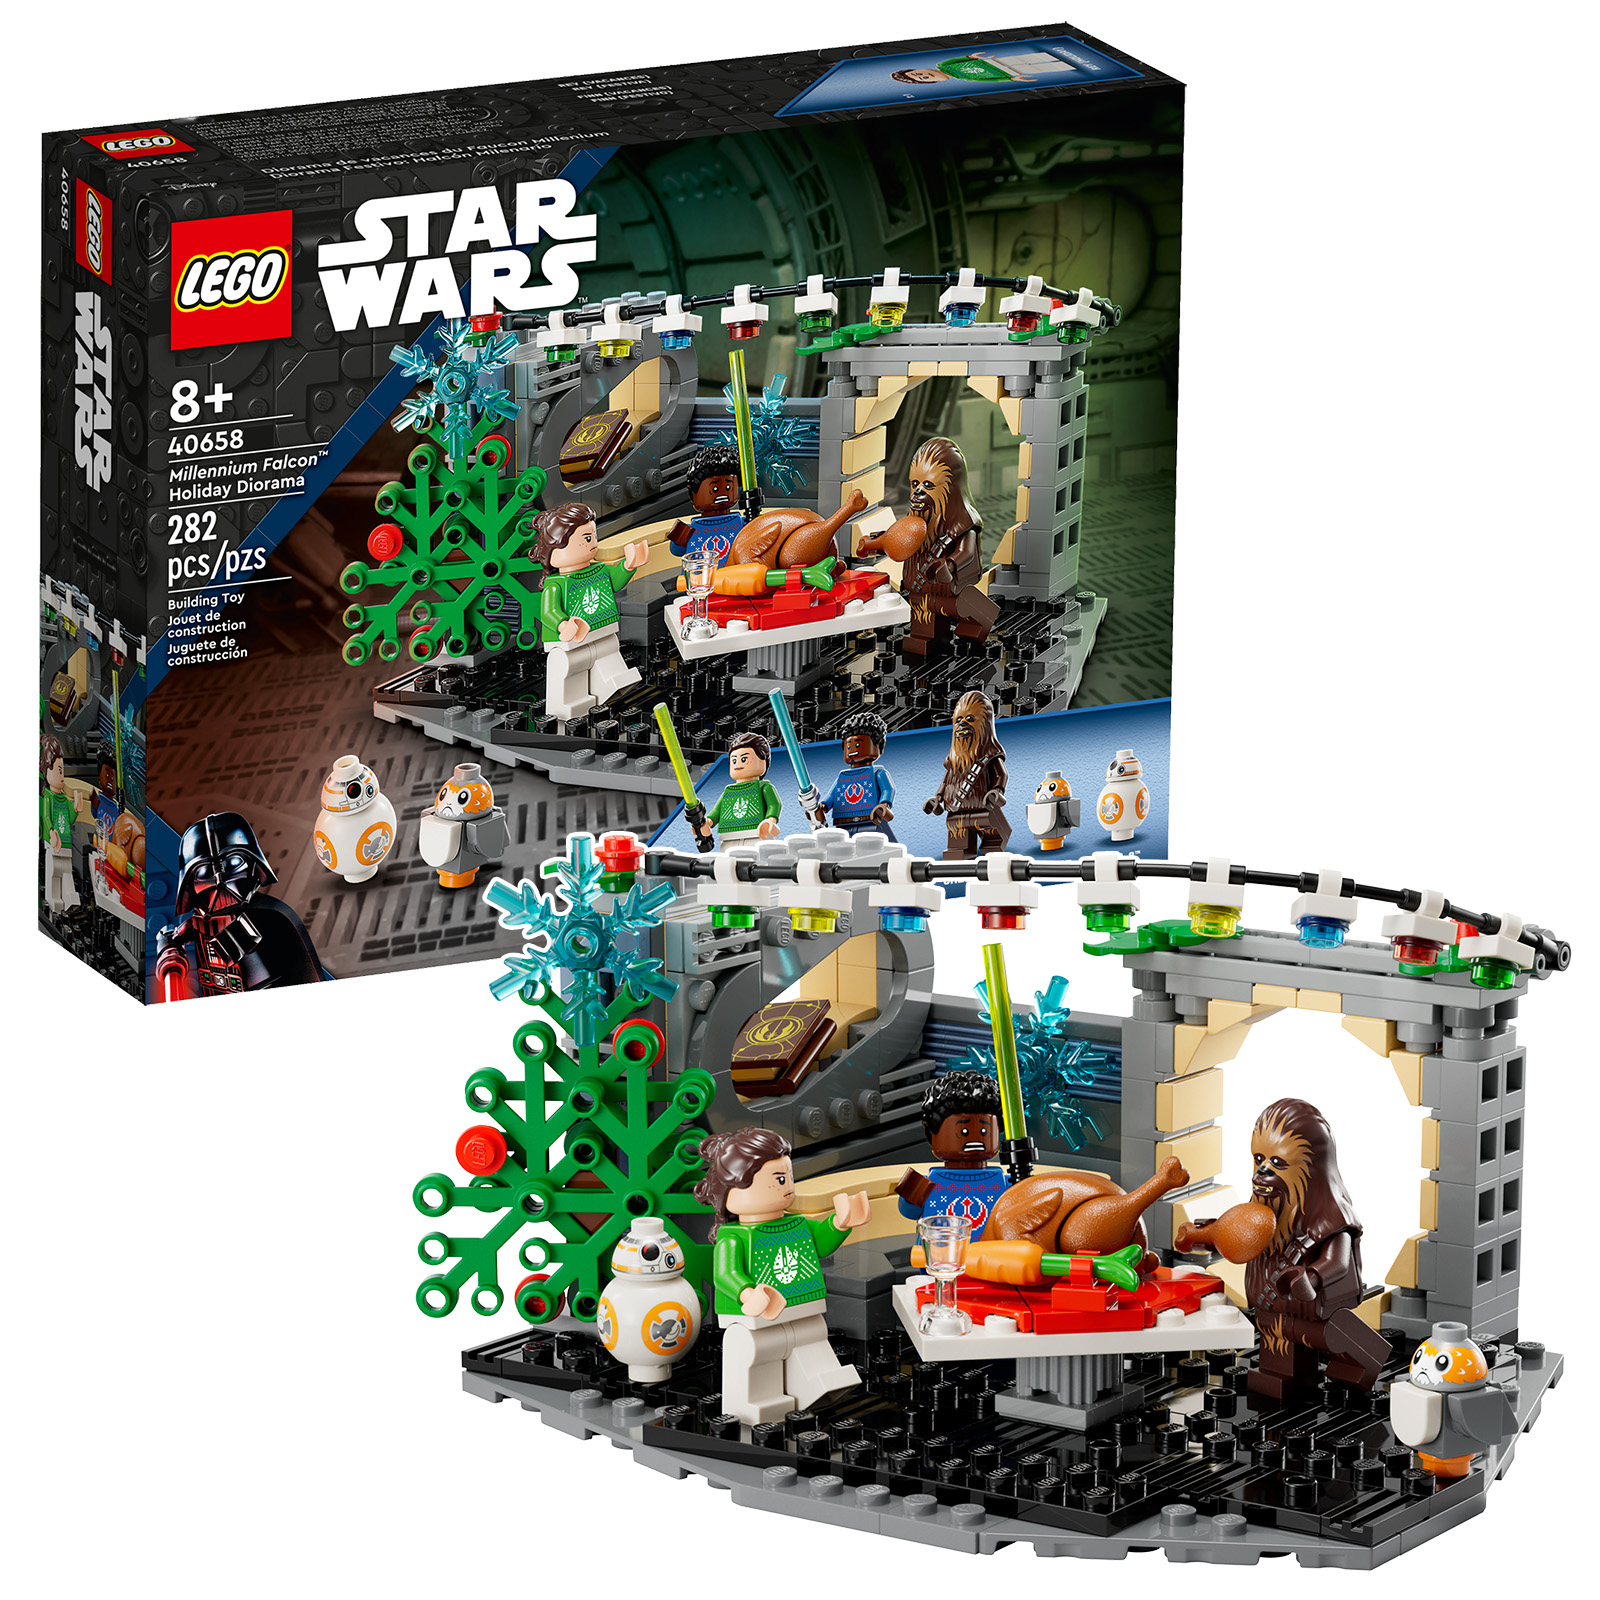 ▻ LEGO Star Wars 40658 Millennium Falcon Holiday Diorama: the set is online  on the Shop - HOTH BRICKS